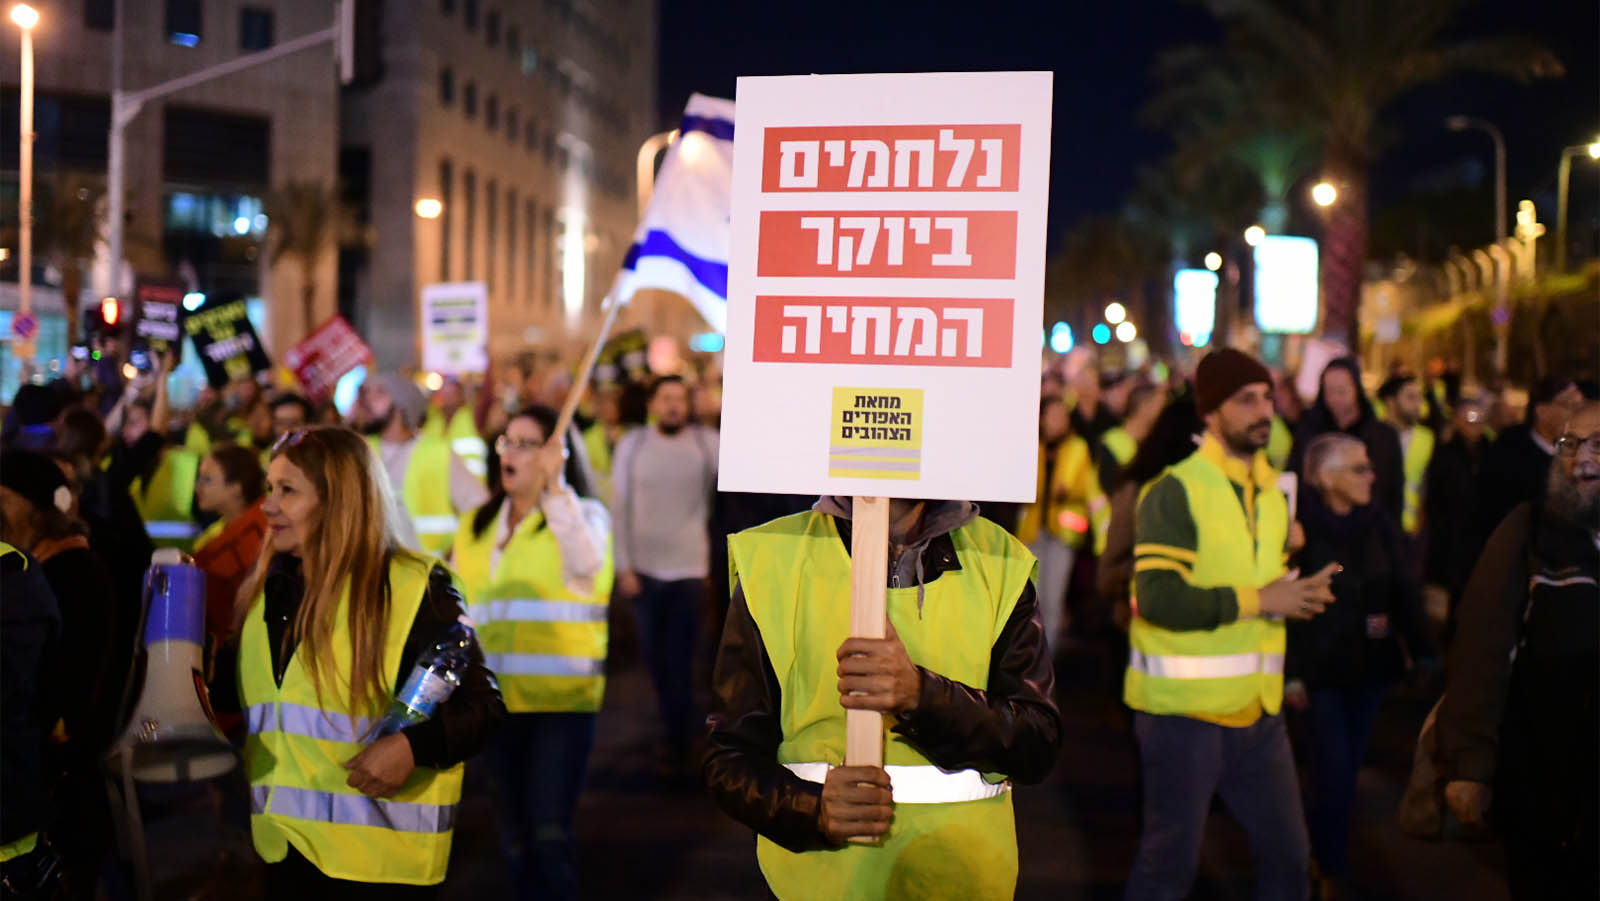 Israeli &quot;yellow vest&quot; protests protest against the rising cost of living, near the Government Quarters in Tel Aviv, on December 22, 2018. Photo by Tomer Neuberg/Flash90